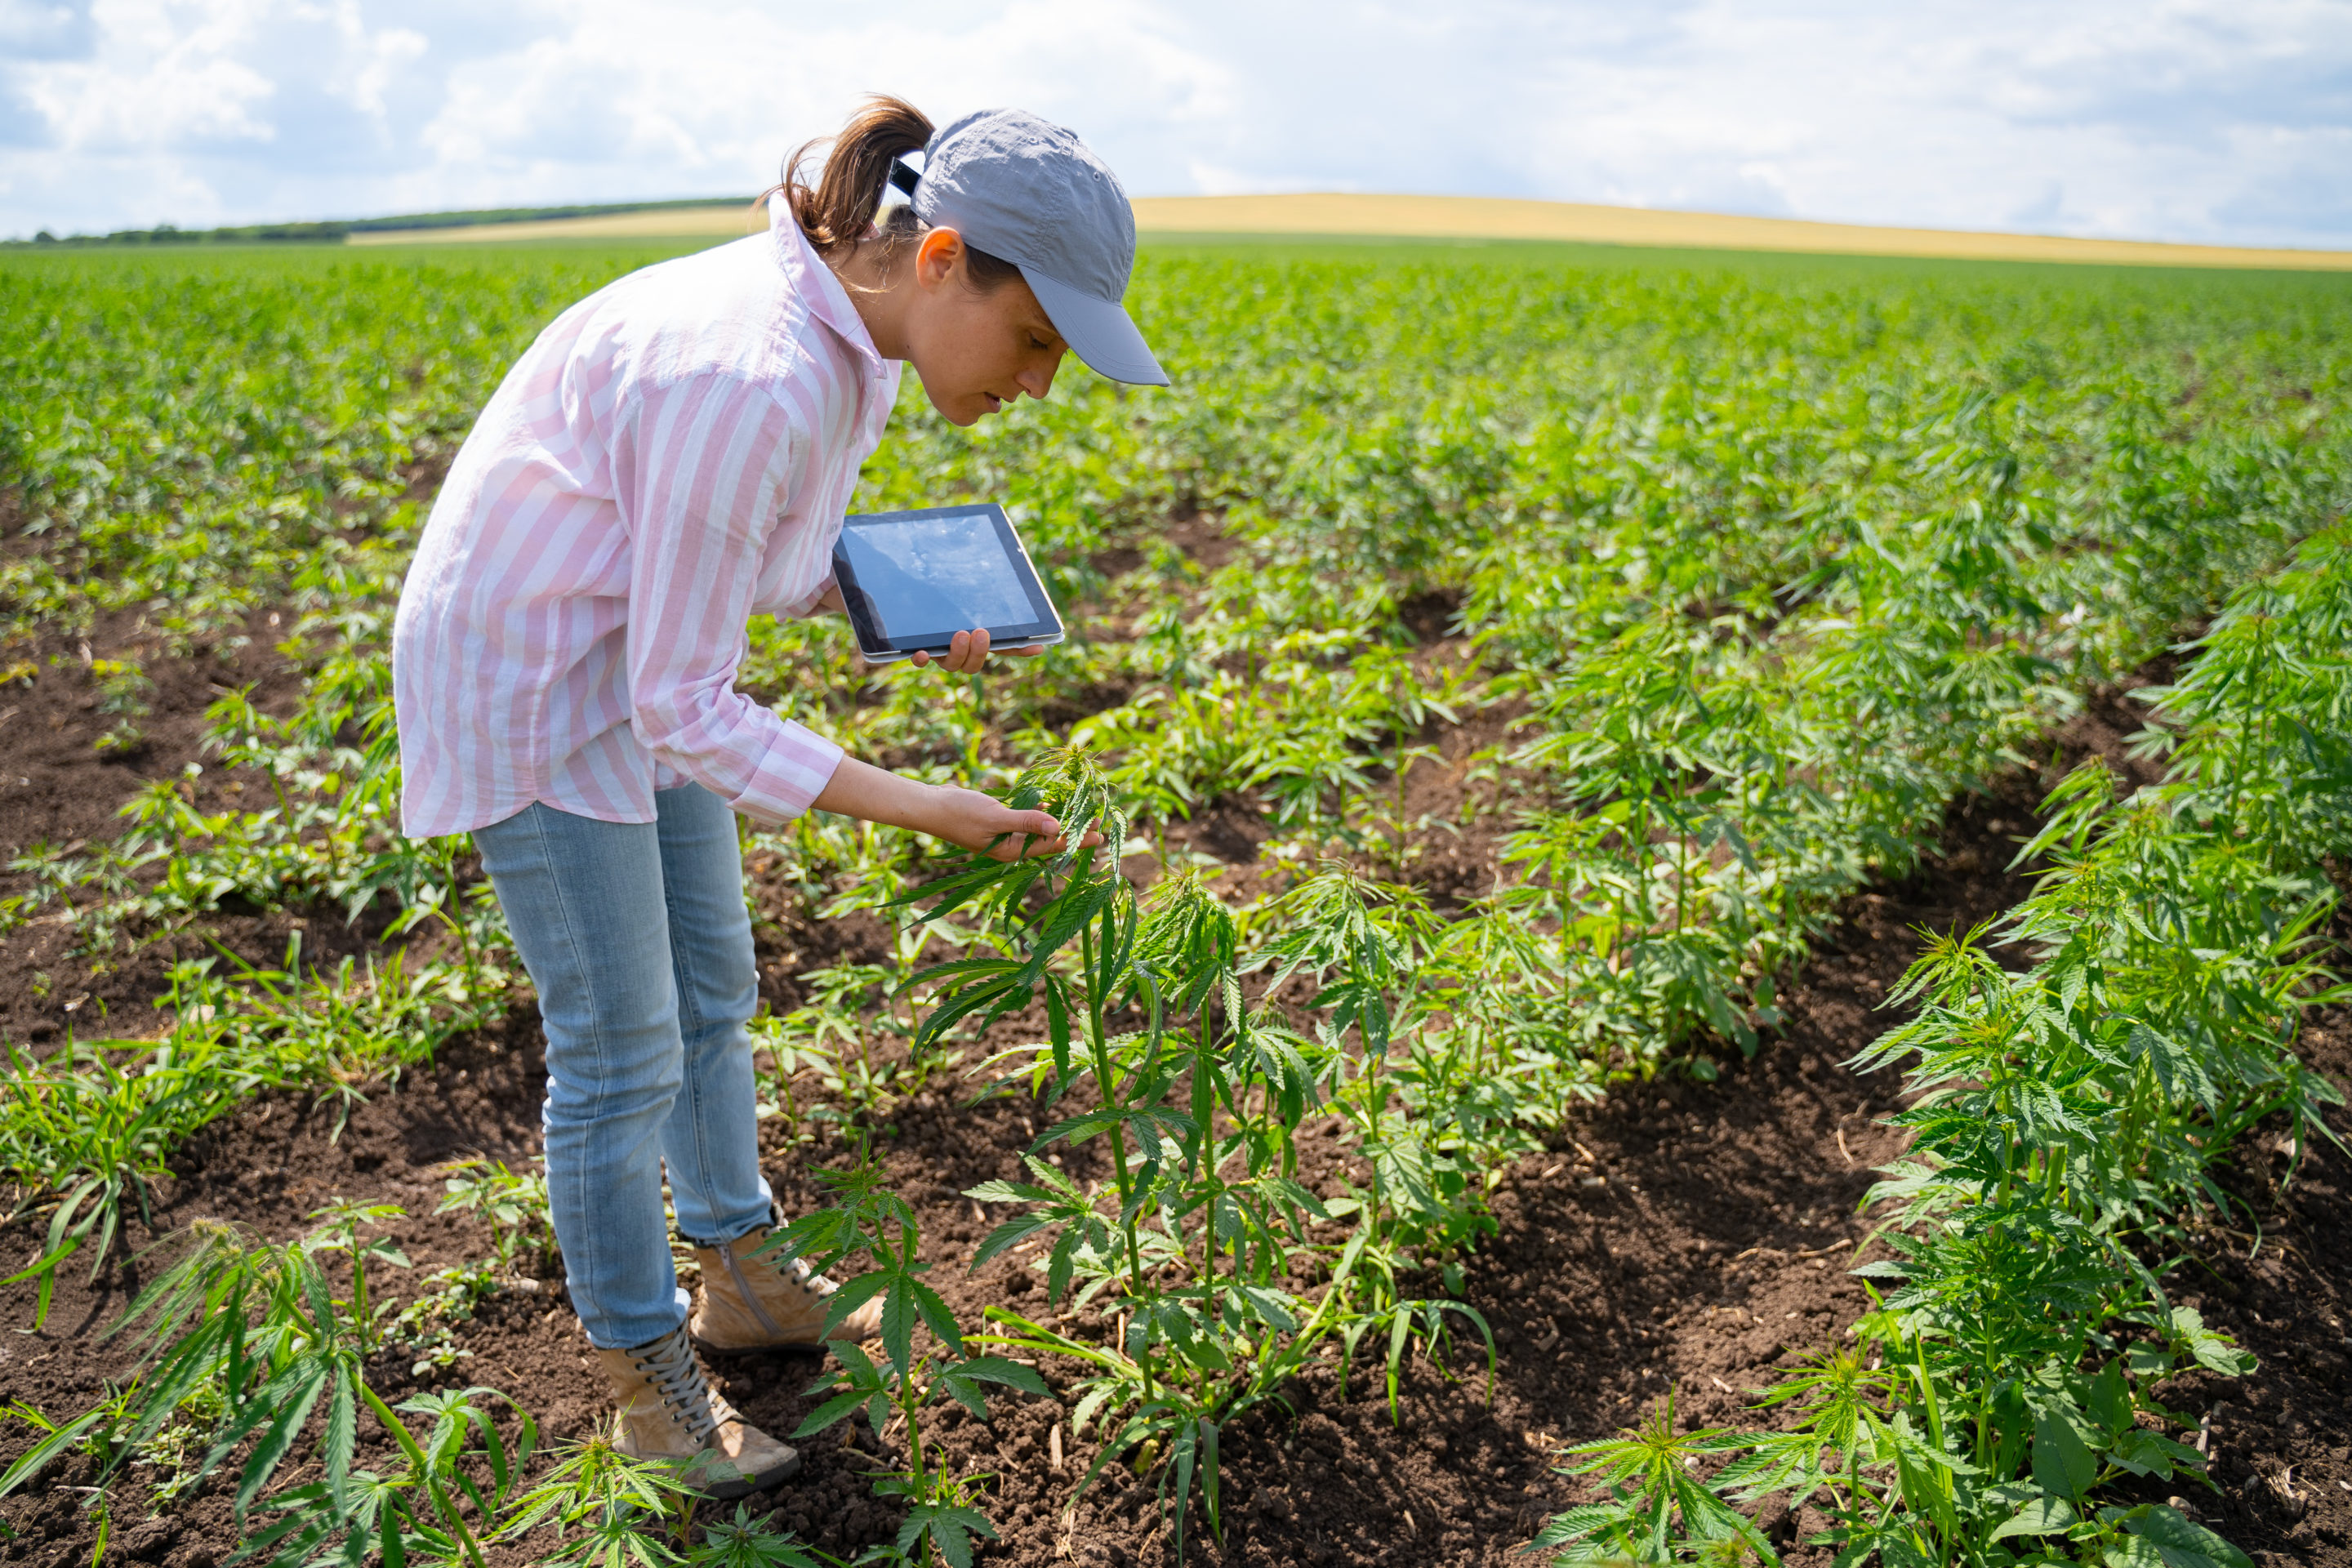 Woman with a tablet leans over to examine plants in a hemp field.